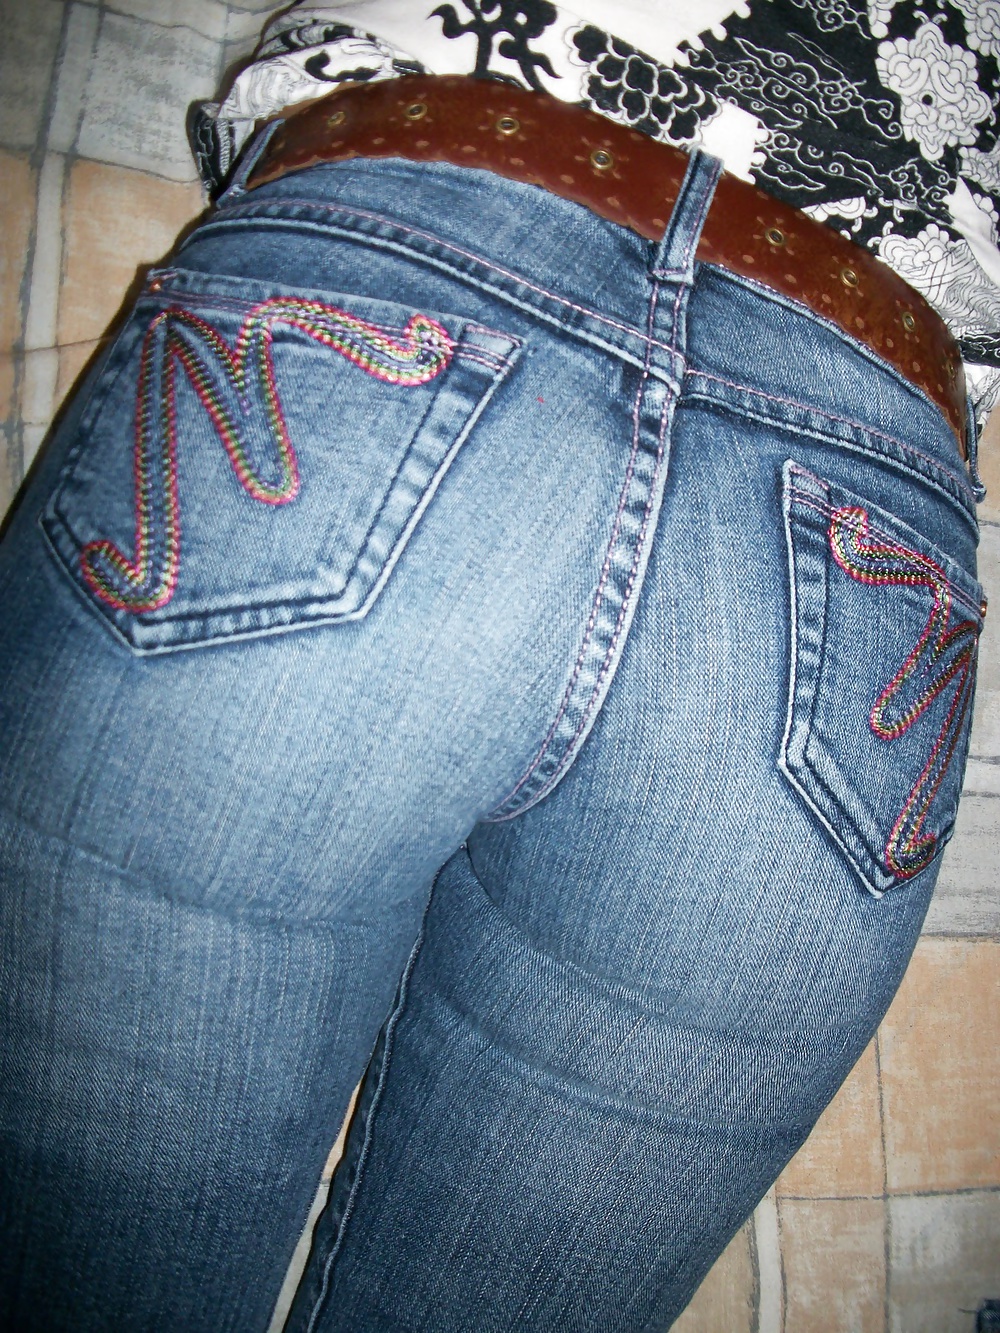 Great Asses in tight Jeans #31142225